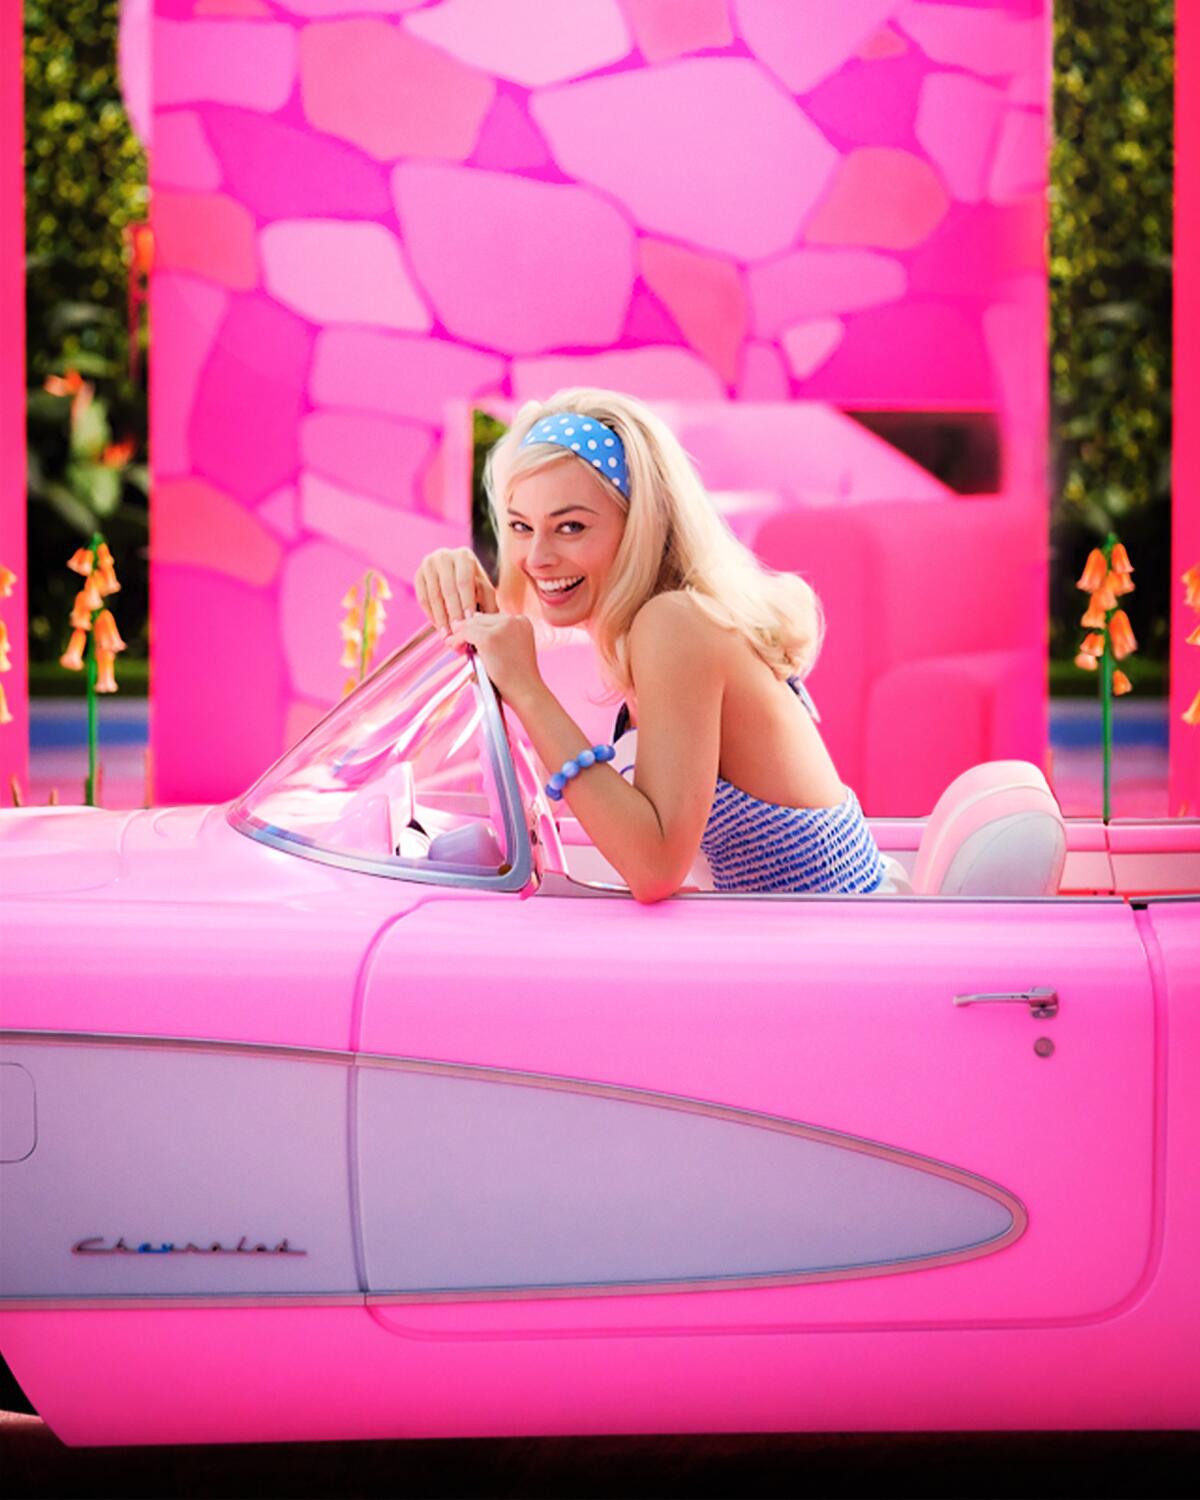 A blond woman in a blue outfit seated in a pink convertible car